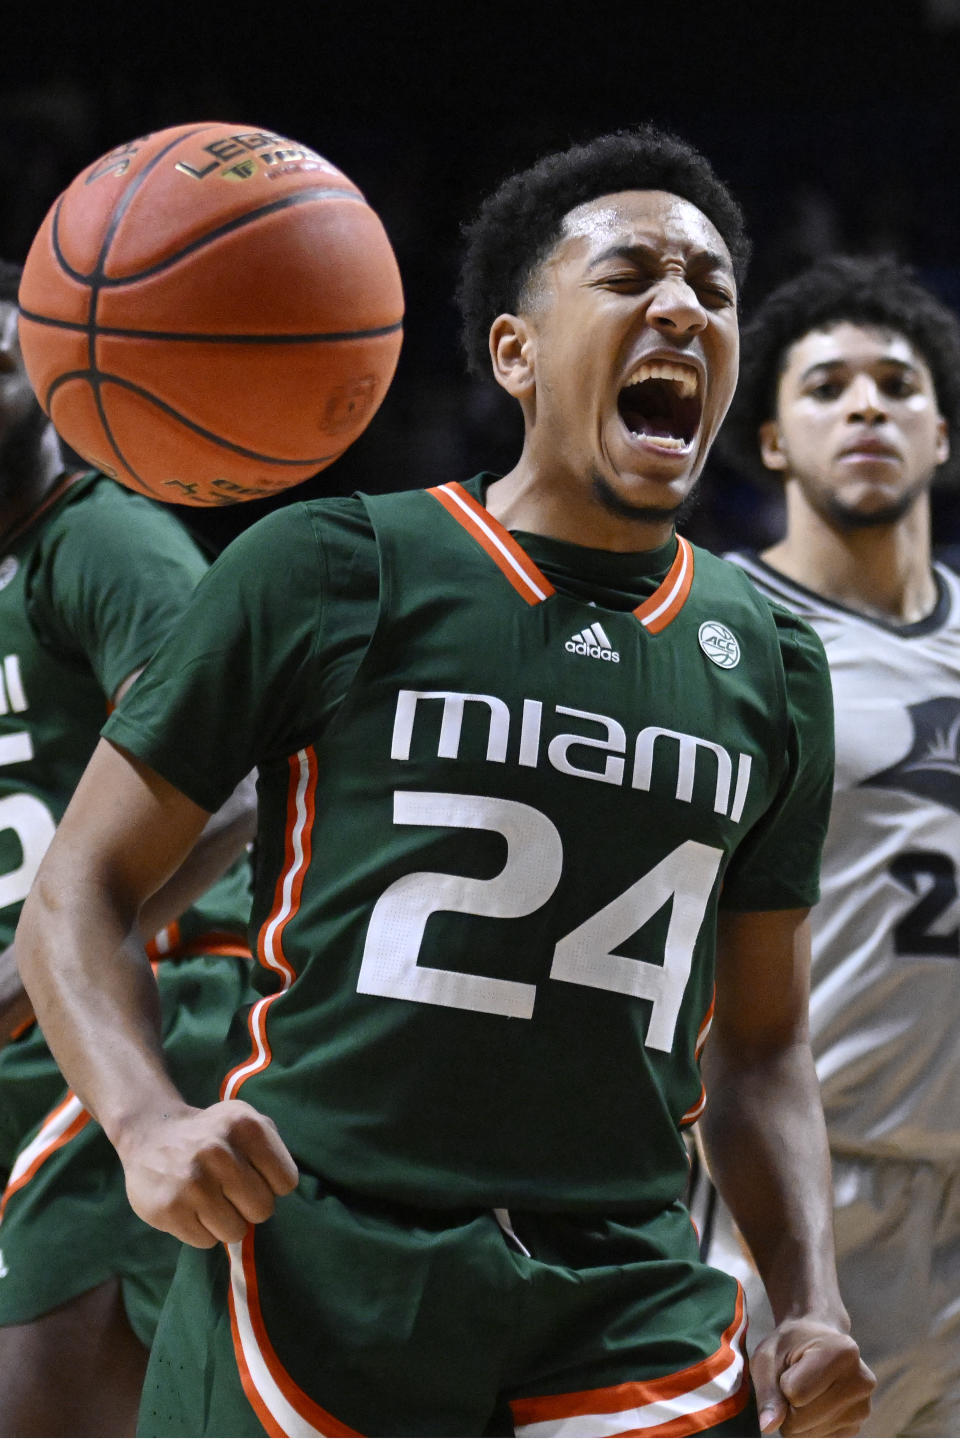 Miami guard Nijel Pack (24) reacts in the second half of an NCAA college basketball game against Providence, Saturday, Nov. 19, 2022, in Uncasville, Conn. (AP Photo/Jessica Hill)